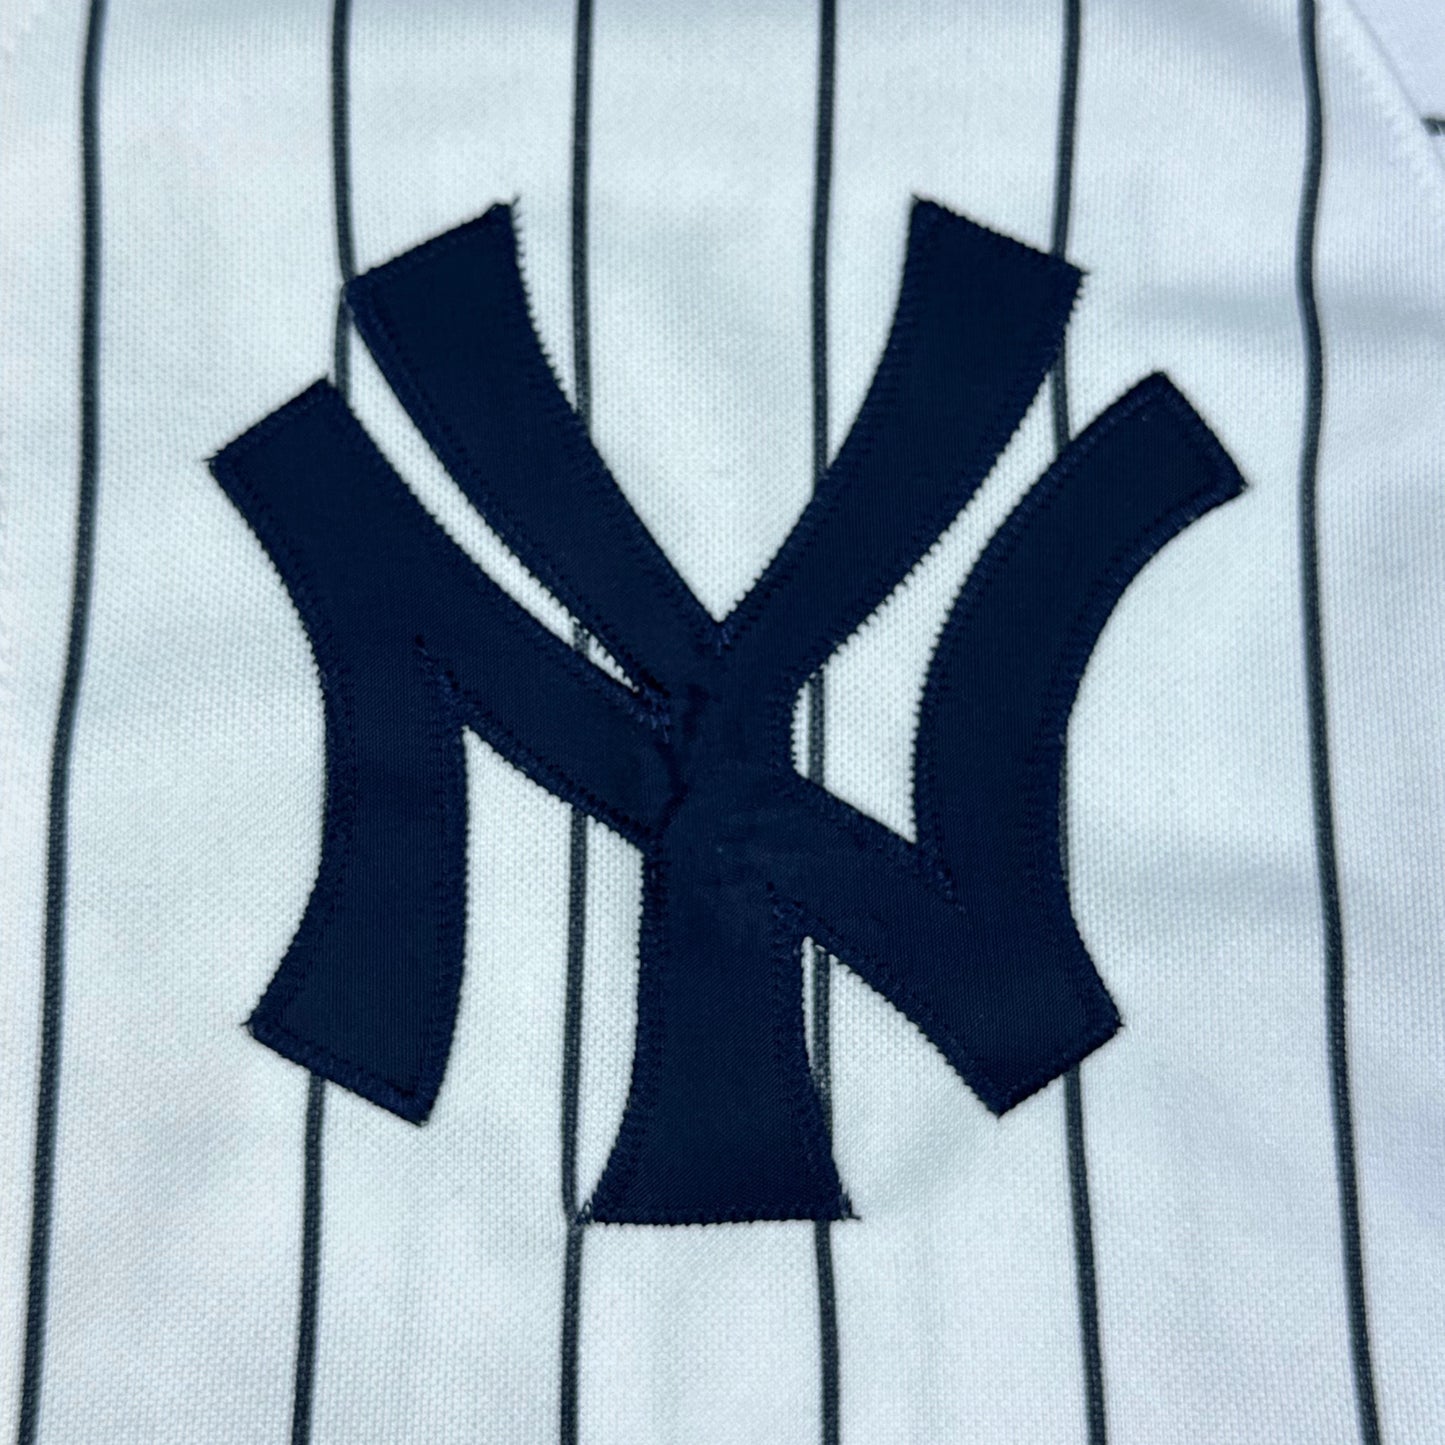 Vintage Jason Giambi New York Yankees Russell Athletic Pinstripe Youth Jersey